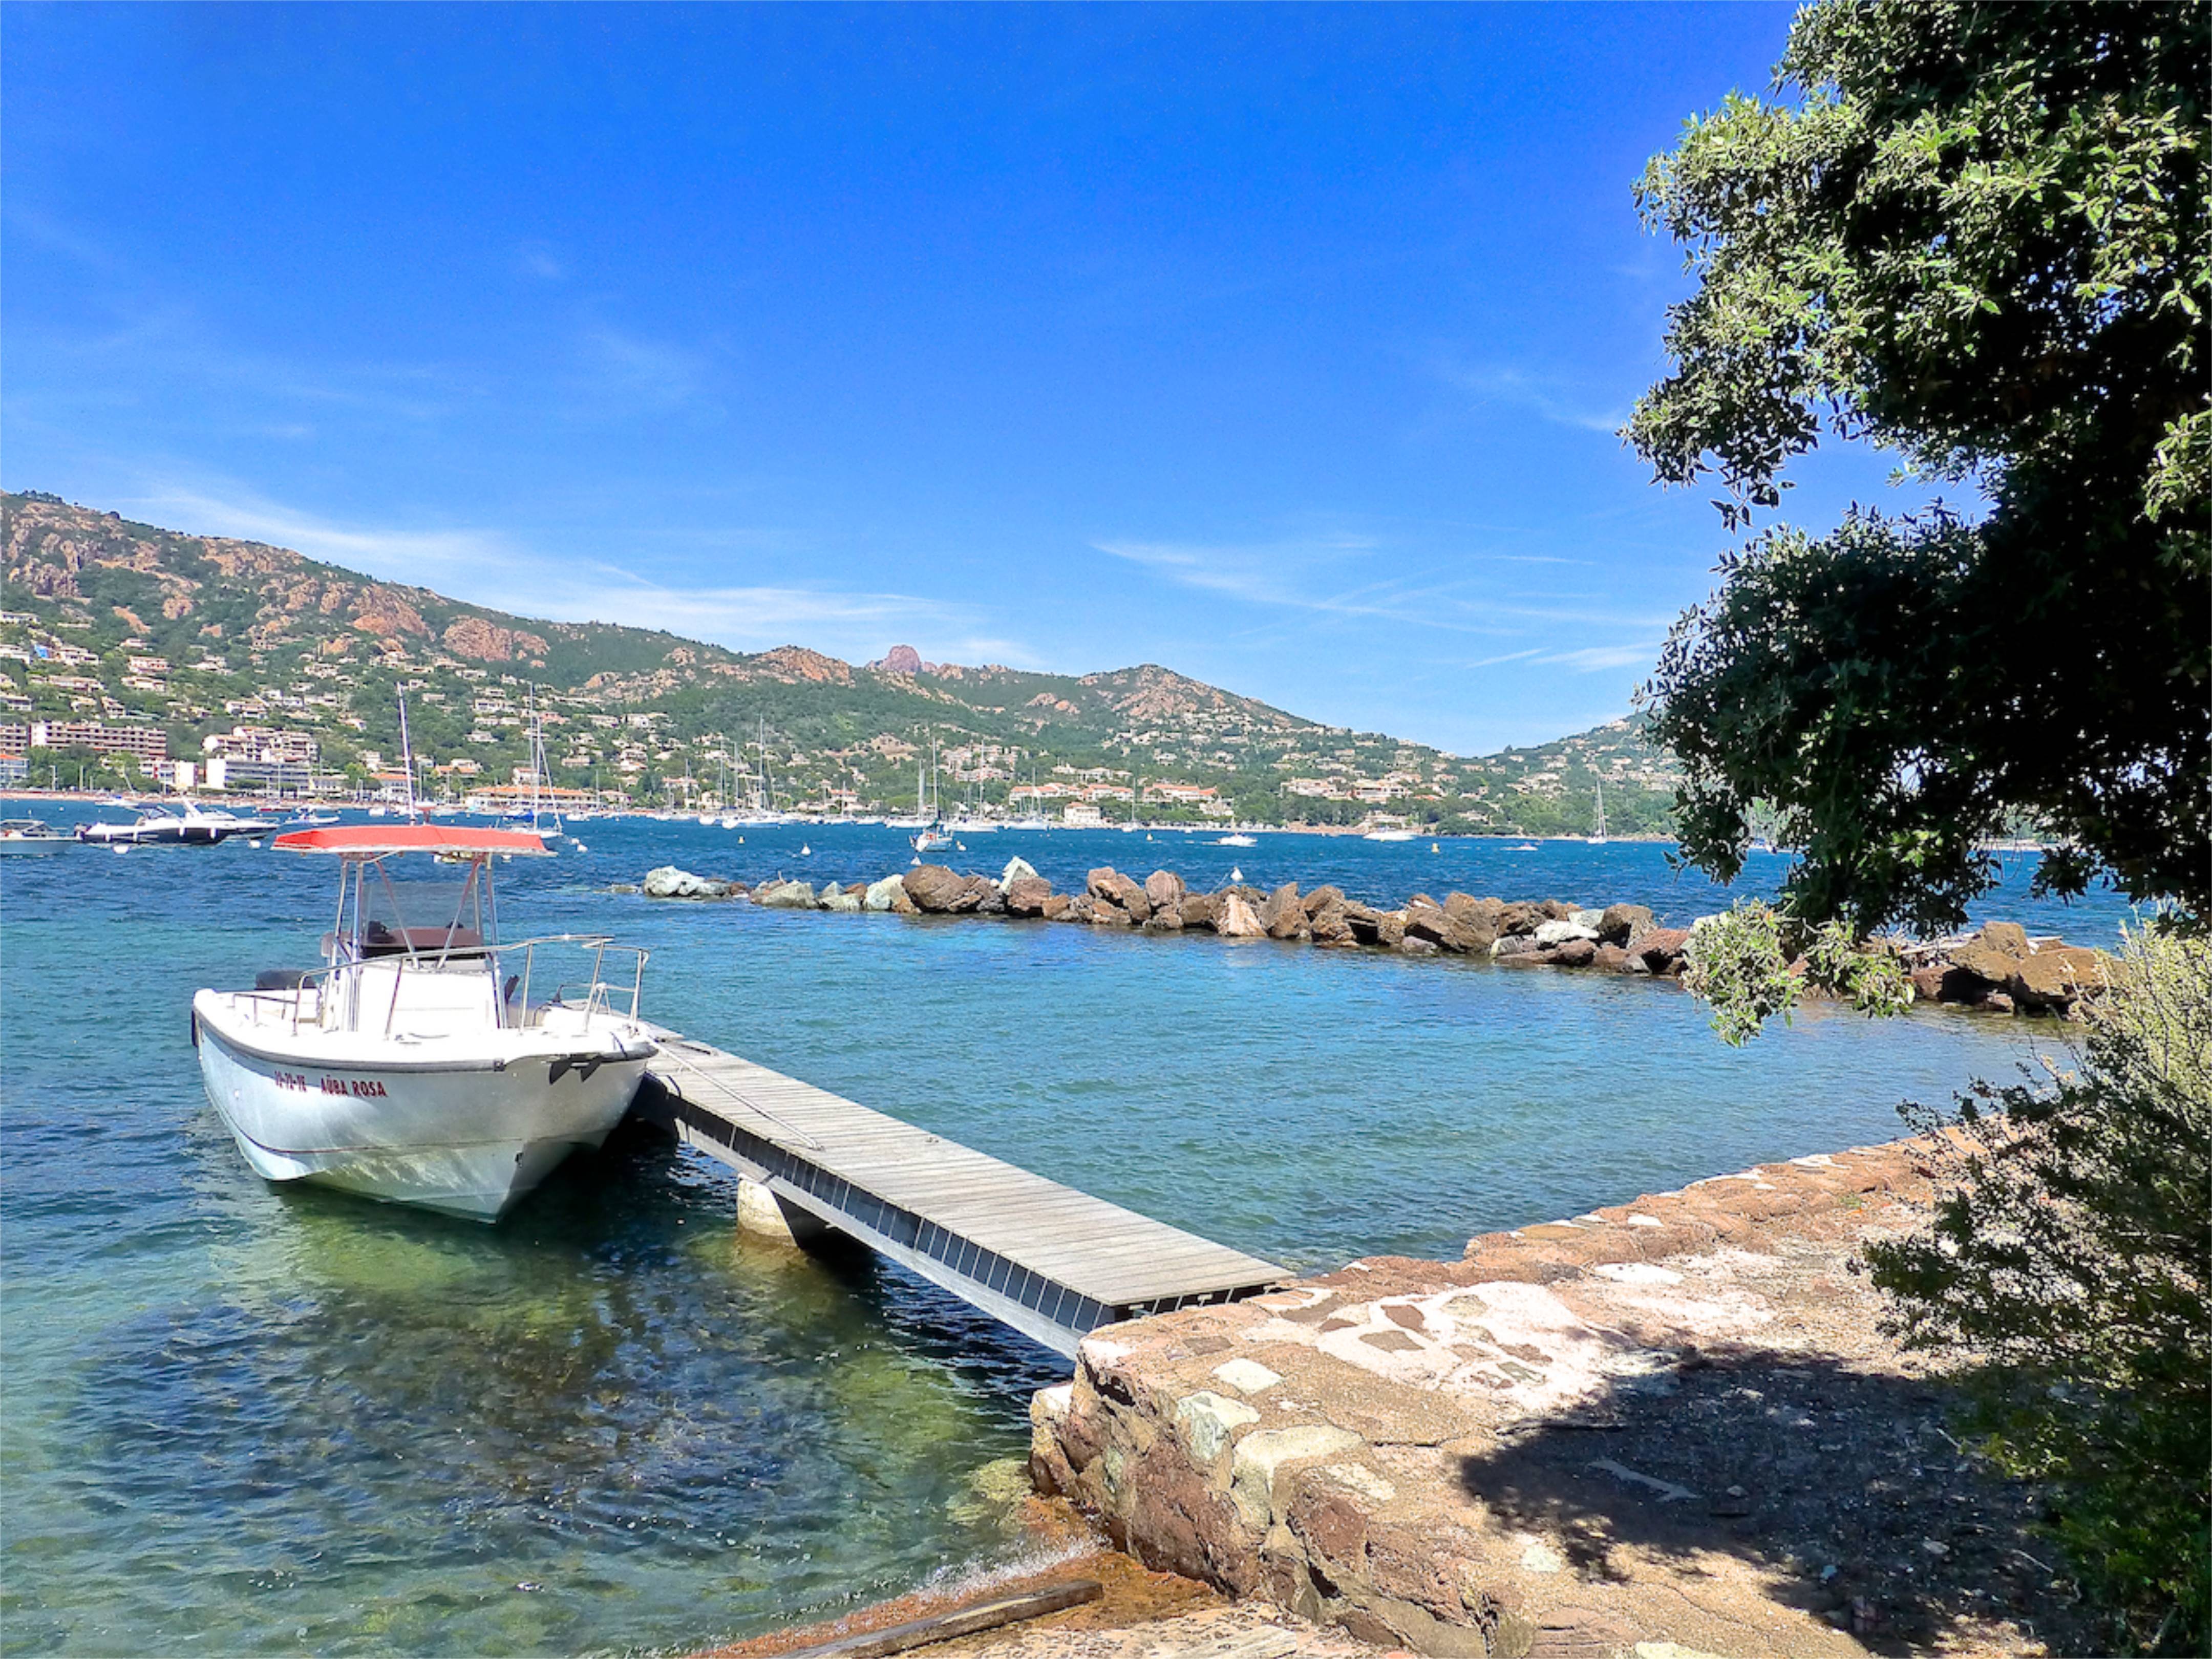 Seafront Property for sale in Agay with private jetty and beach access